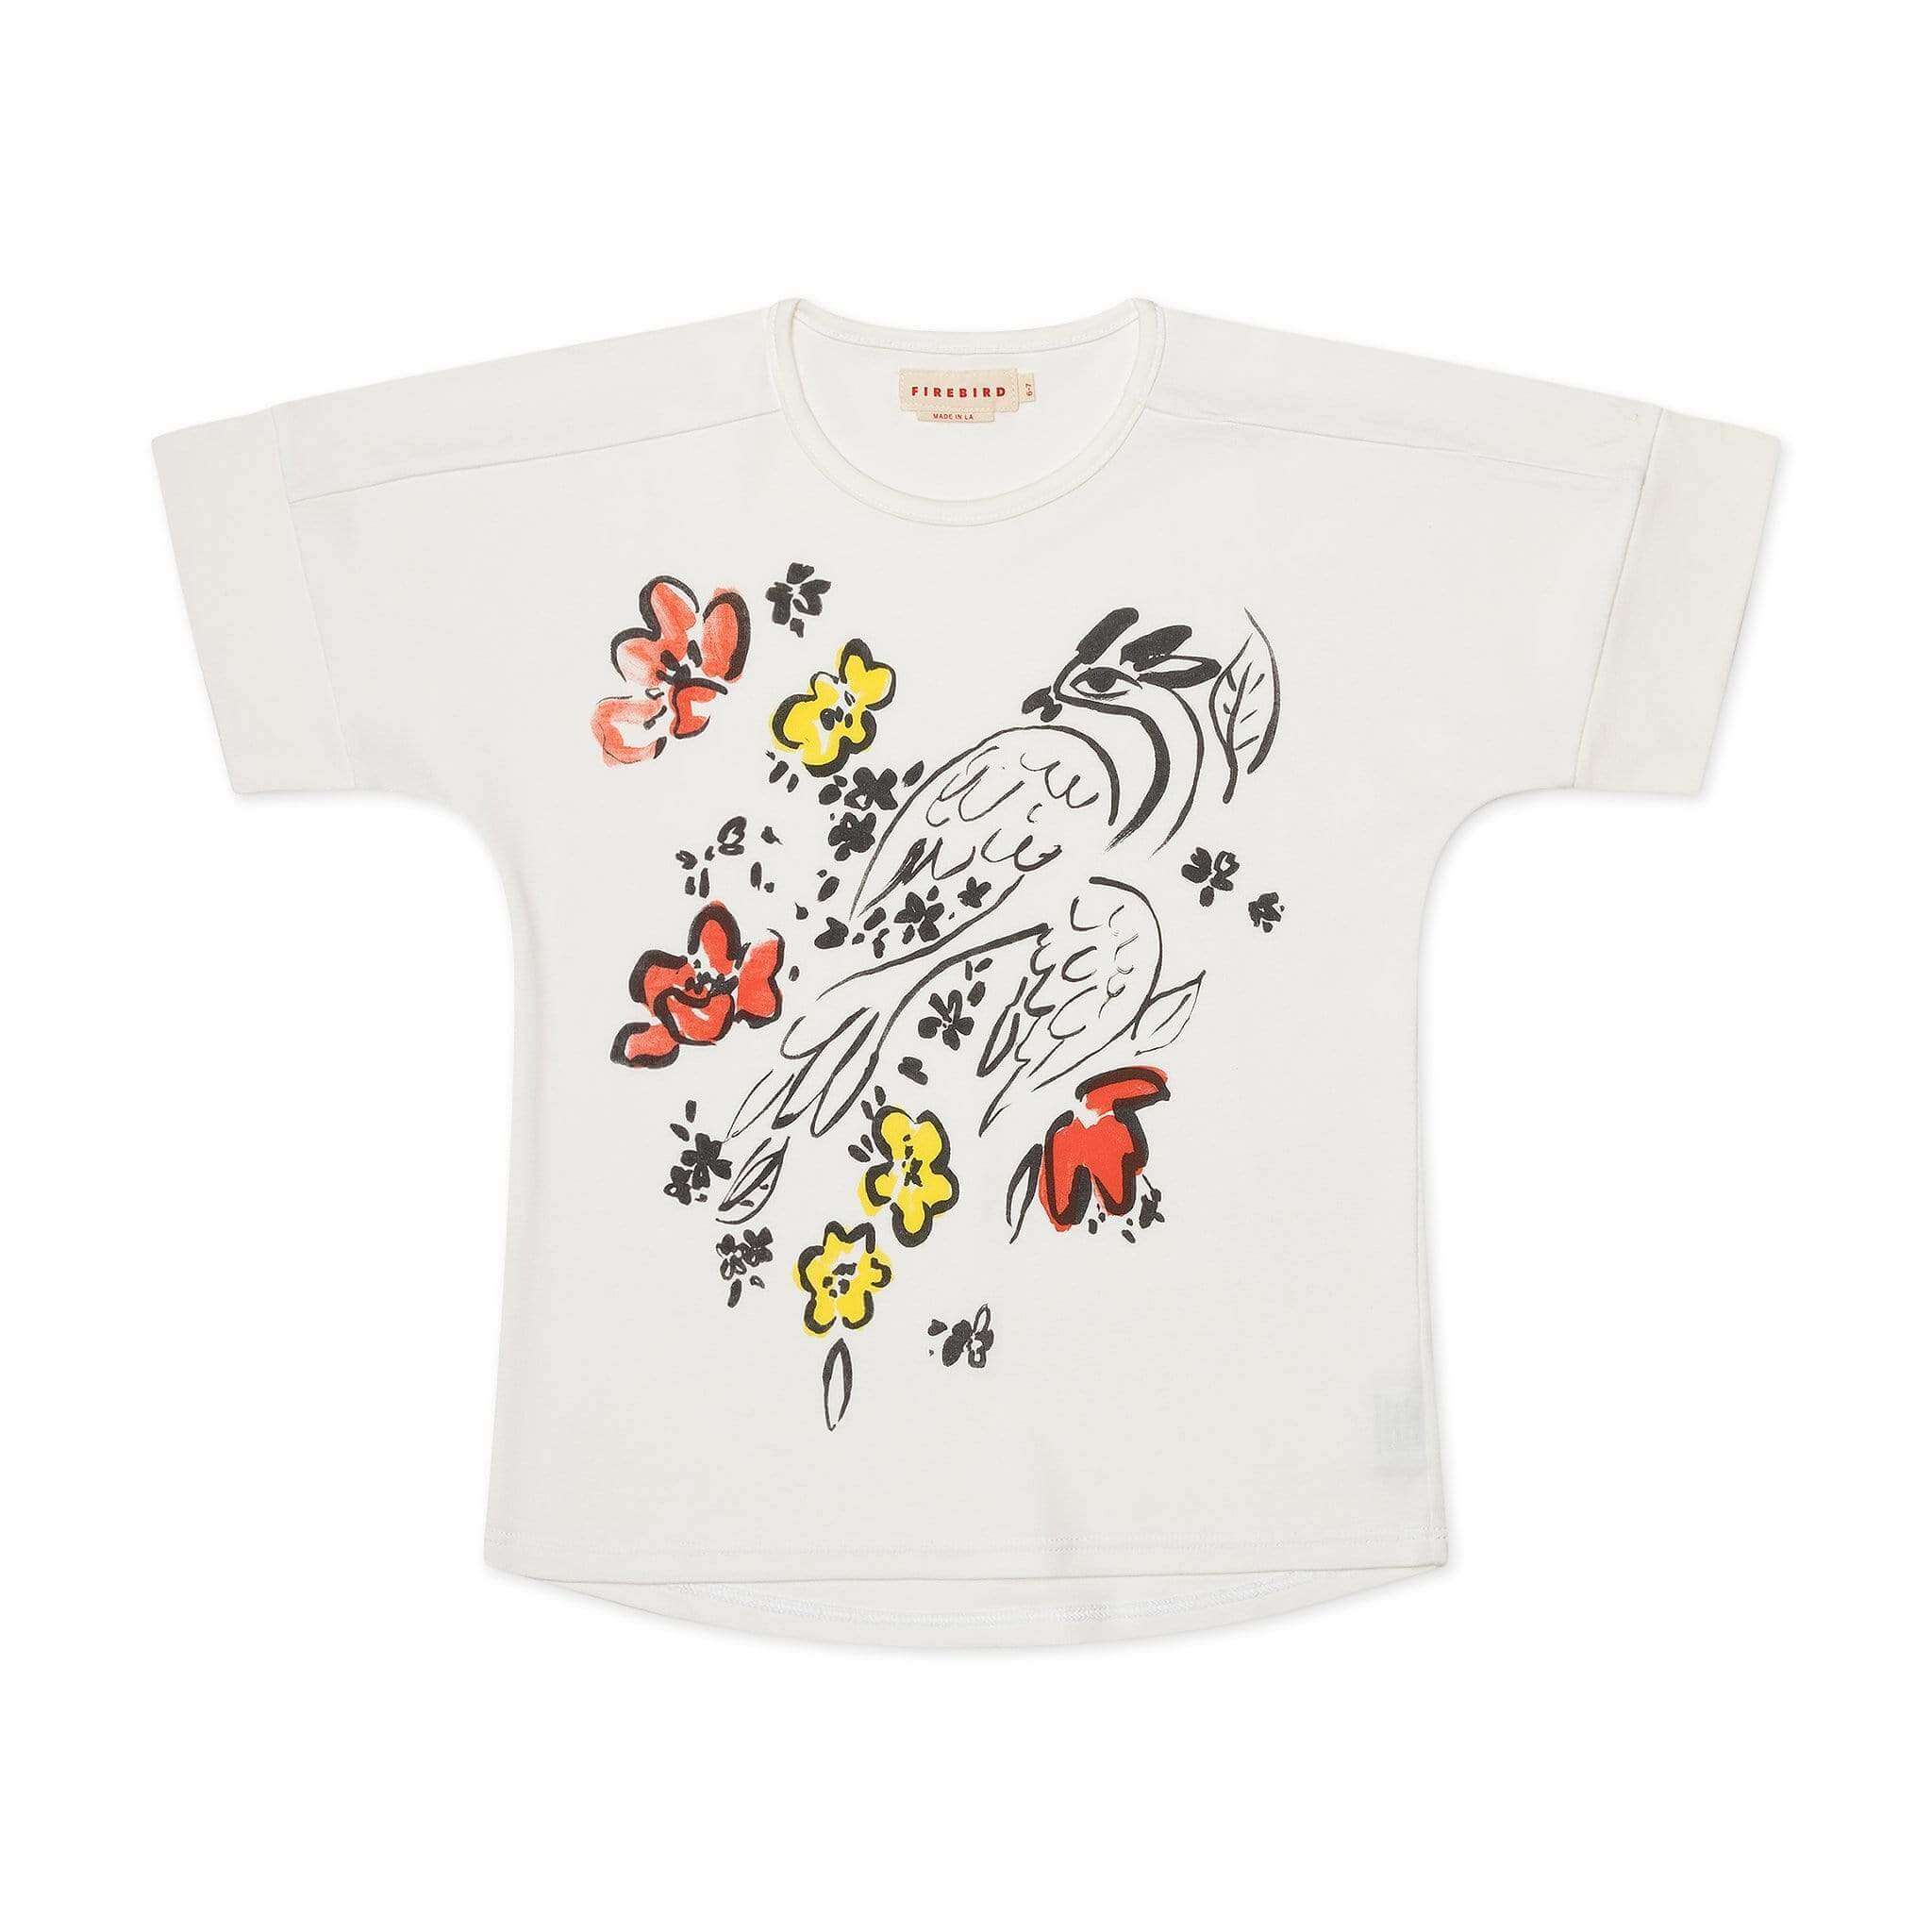 One of our favorite girls graphic tees, featuring a painted Firebird. Artwork inspired by Marc Chagall. Made from 100% organic cotton fabric, cut and sewn in LA. Made in the US. 